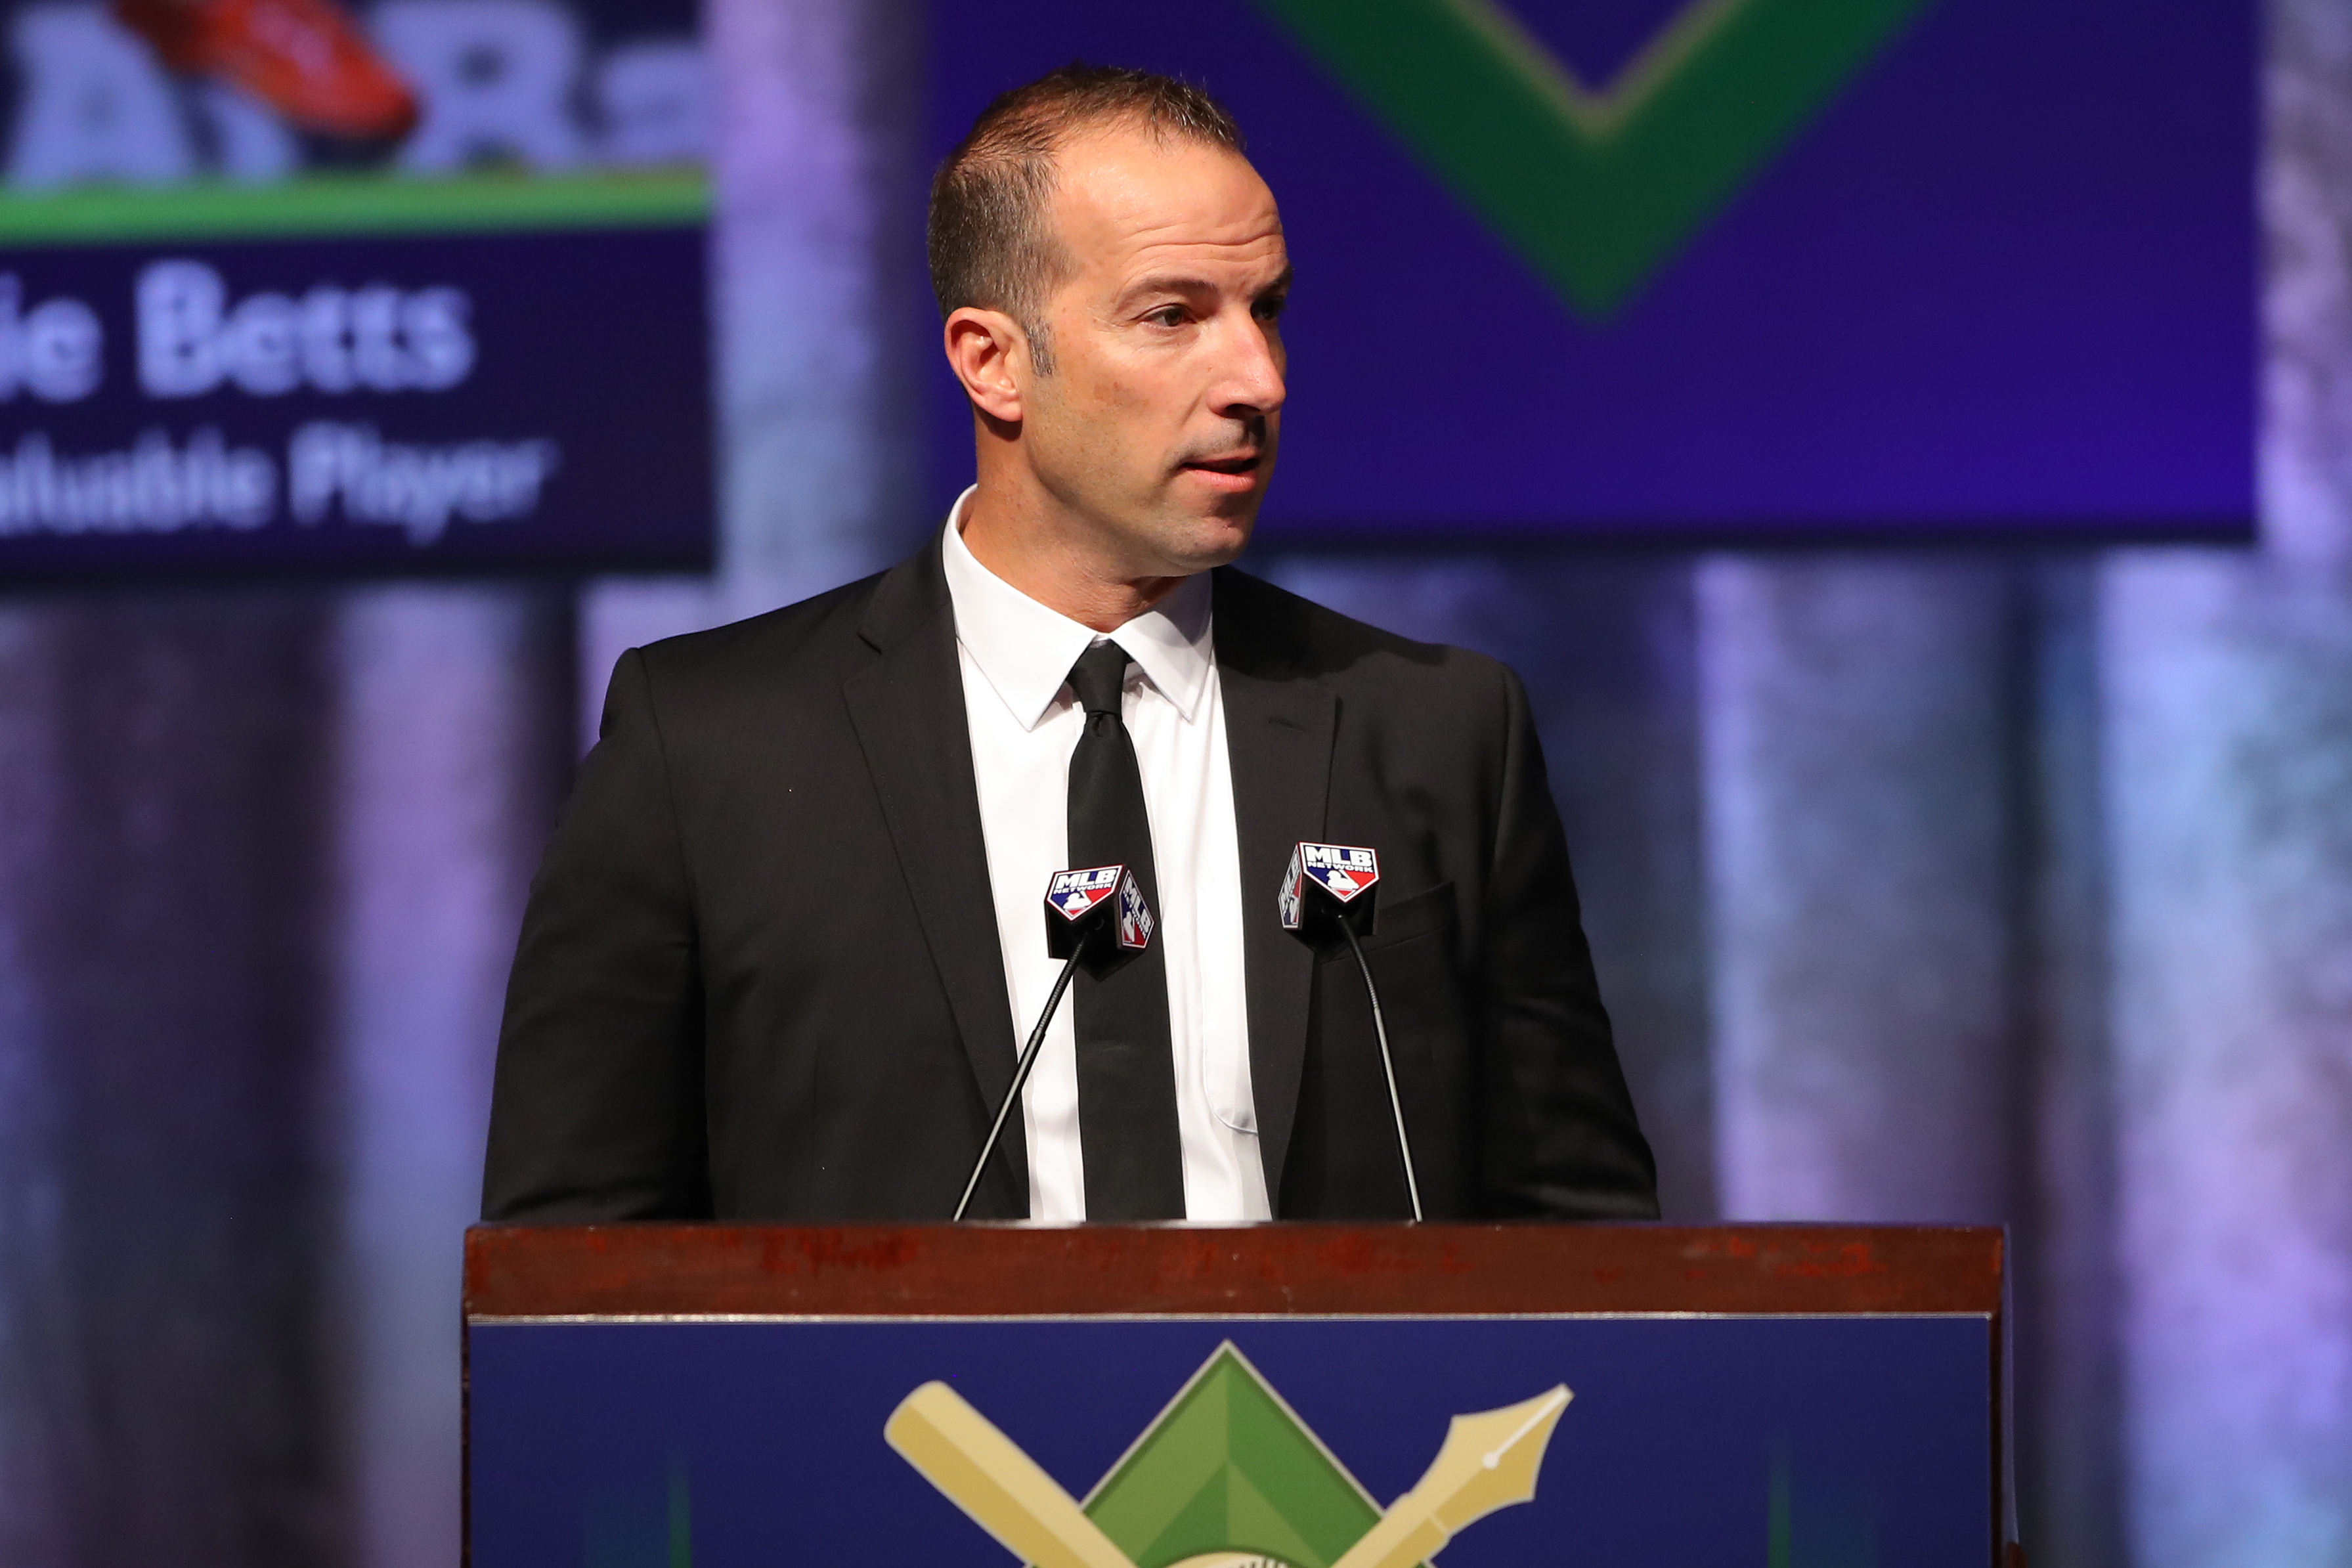 Billy Eppler wearing a black suit and black tie but no sunglasses standing at a podium with two microphones.